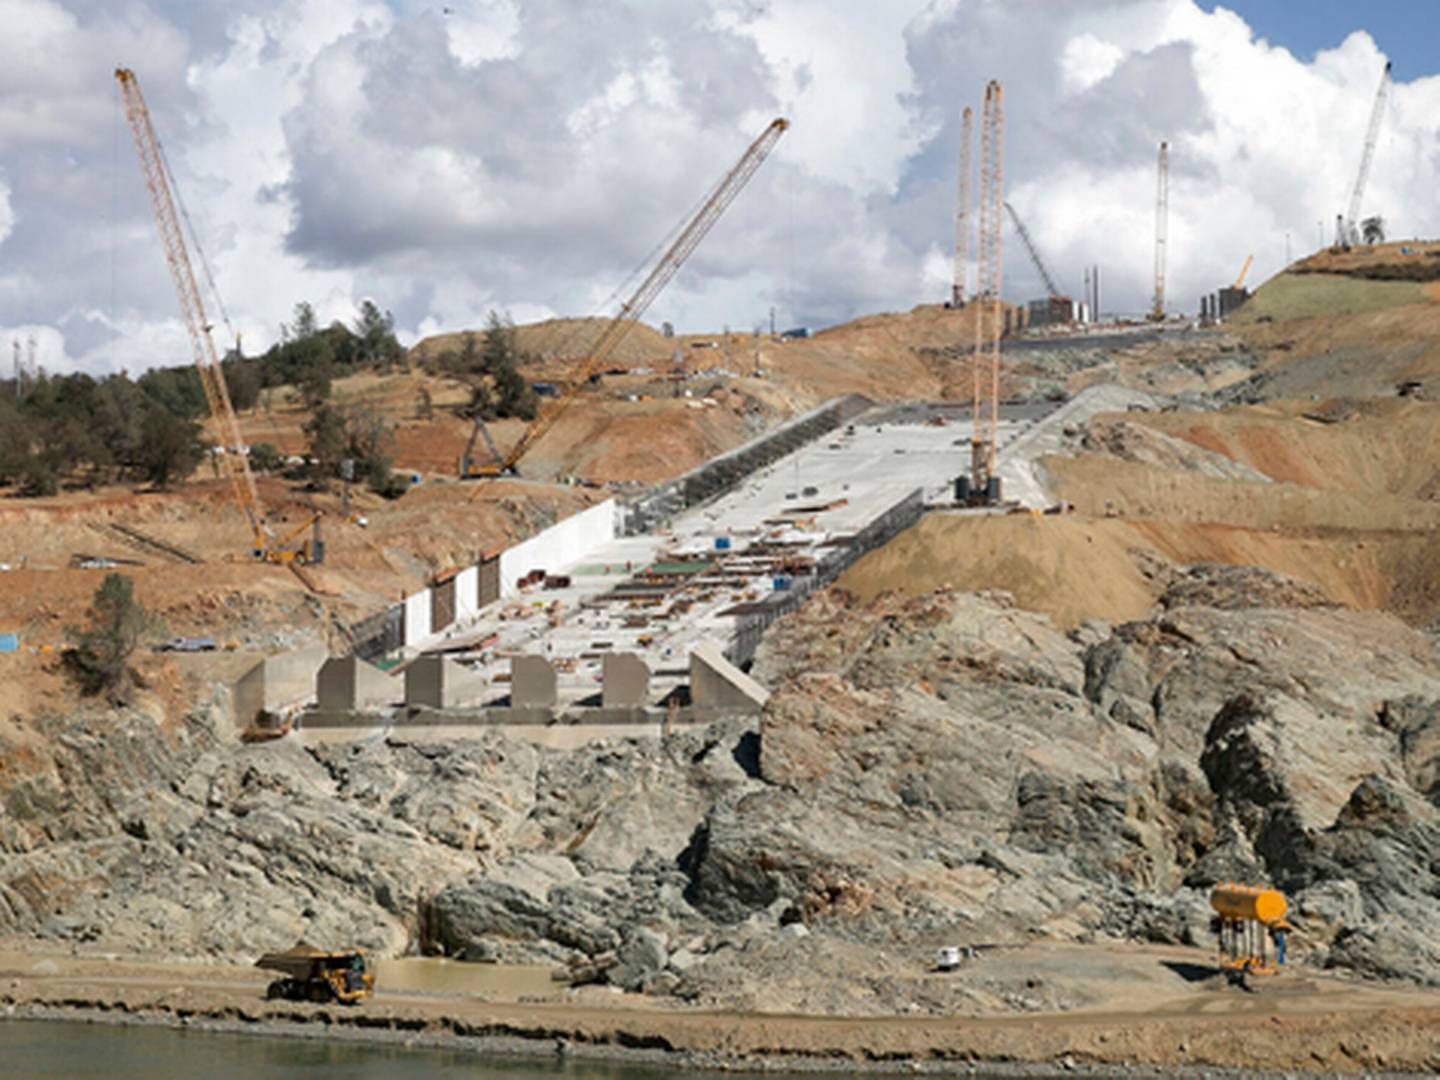 In this Sept. 21, 2017 photo, crews work to repair the damaged spillway on the Oroville Dam in Oroville, California. | Photo: Scanpix